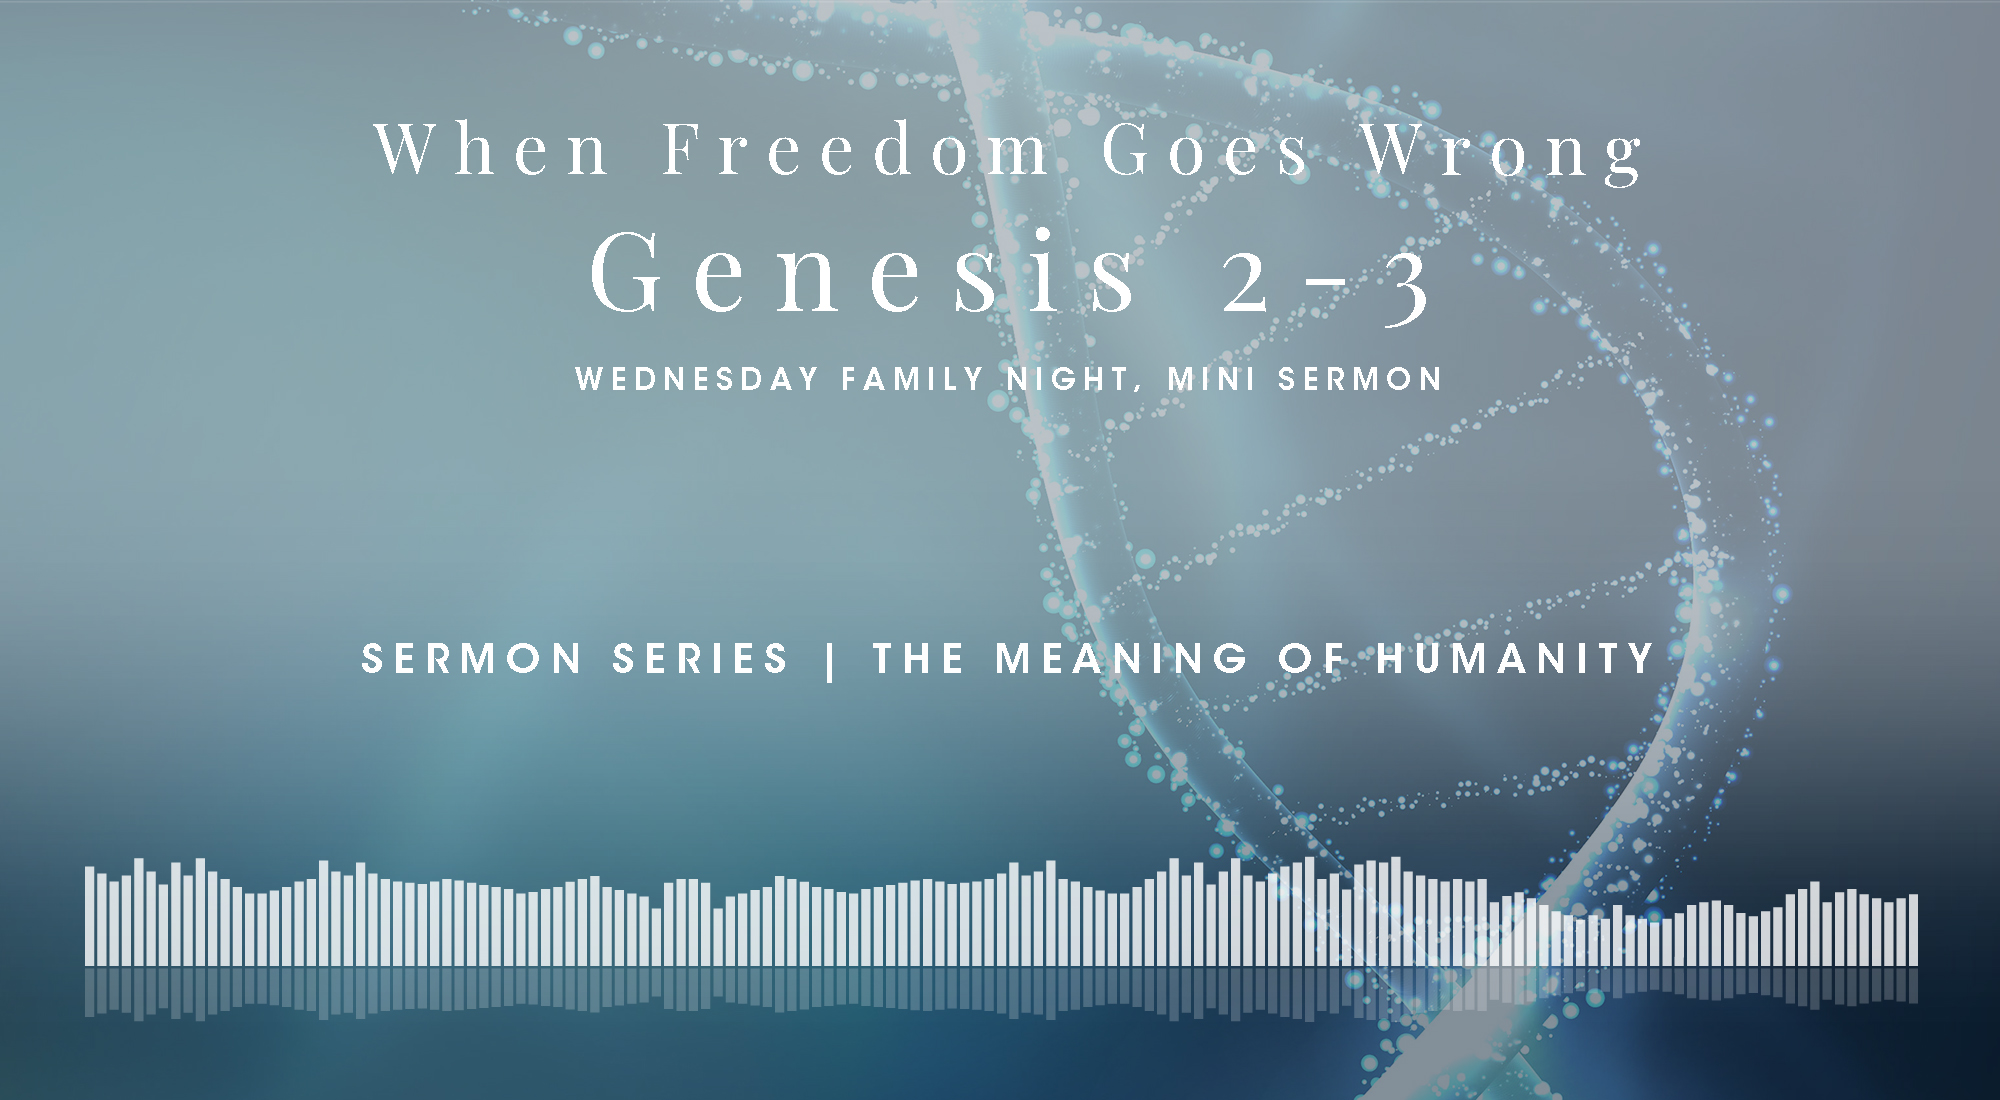 A Mini Bible Study in Genesis 2-3, From The Meaning of Humanity Sermon Series, Wyandotte County Christian Church Wednesday Family Night